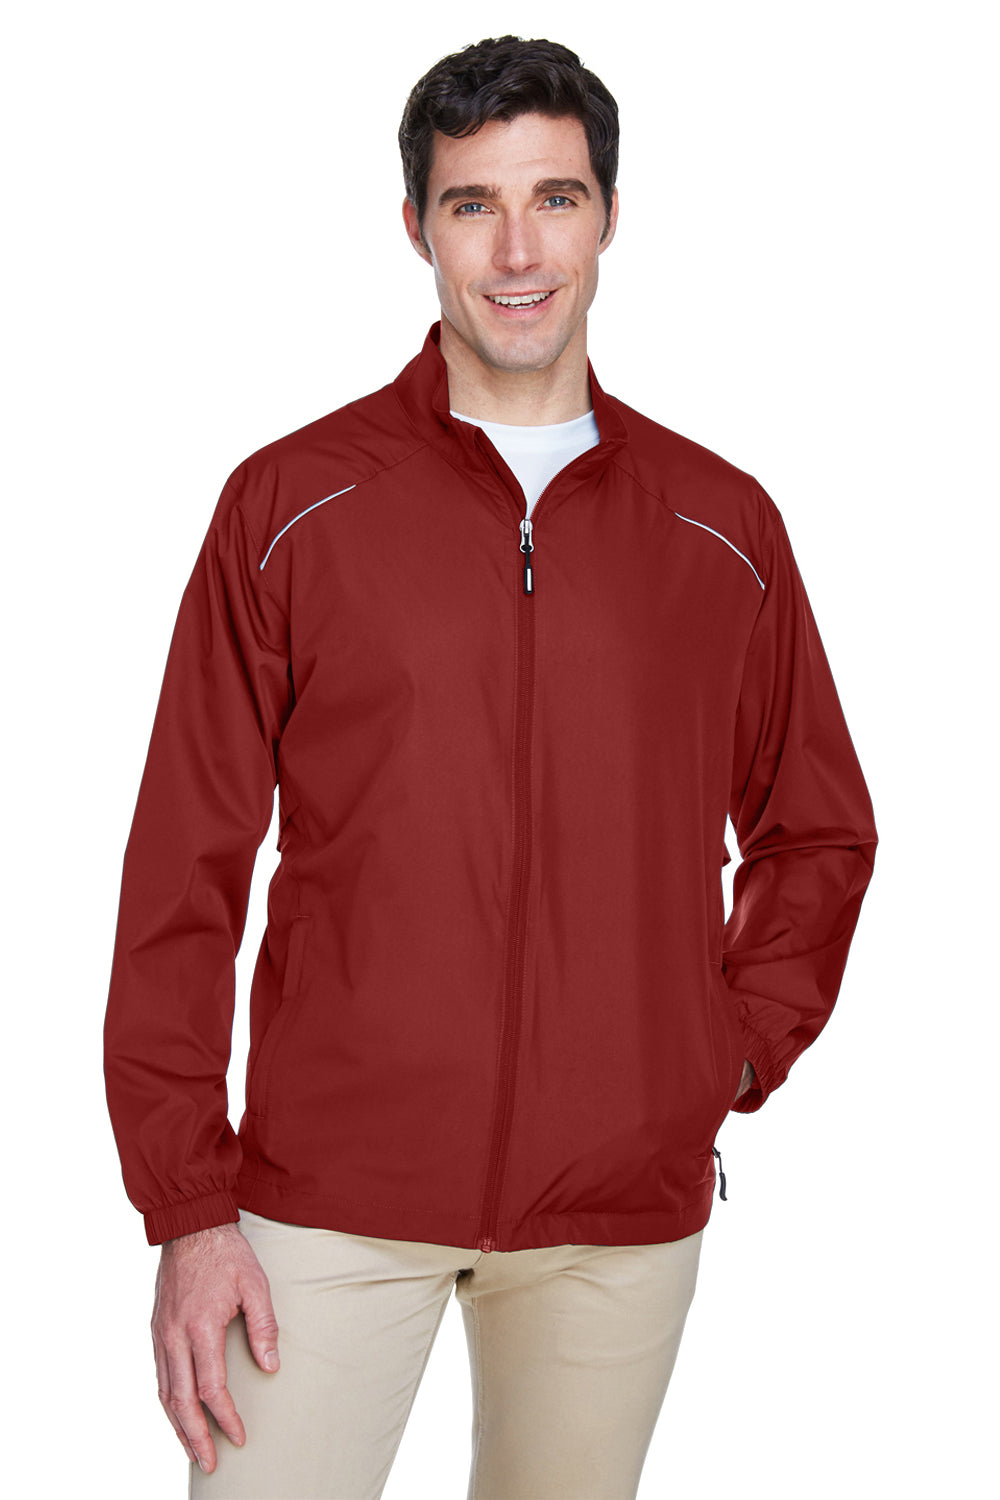 Core 365 88183 Mens Motivate Water Resistant Full Zip Jacket Red Front